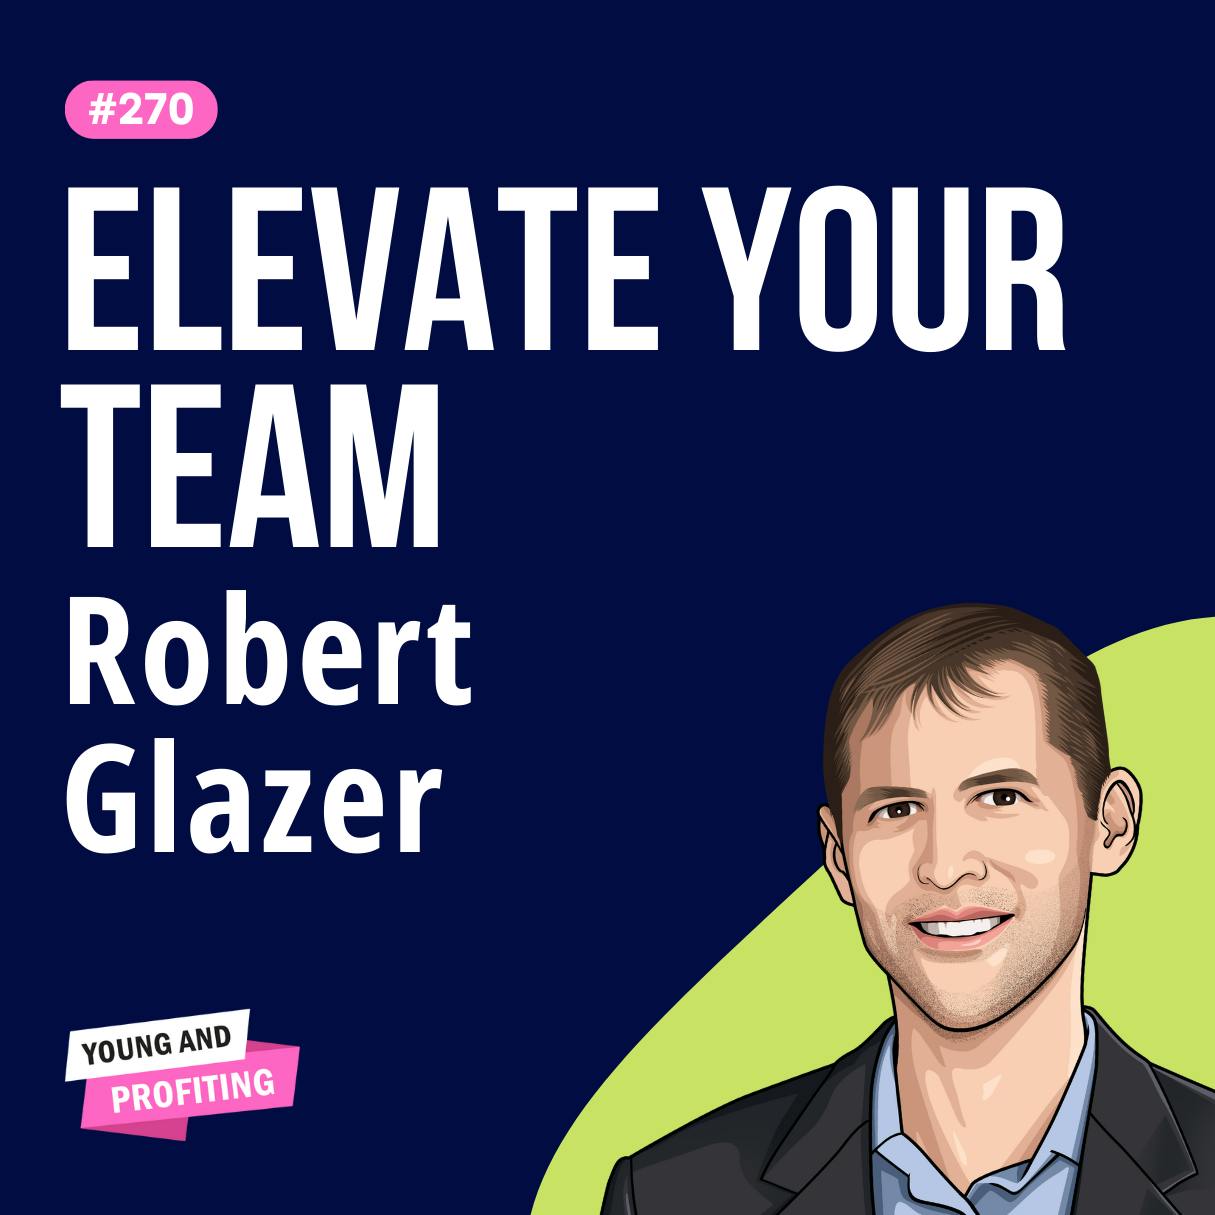 Robert Glazer: How to Build a Winning Team and Culture | E270 by Hala Taha | YAP Media Network